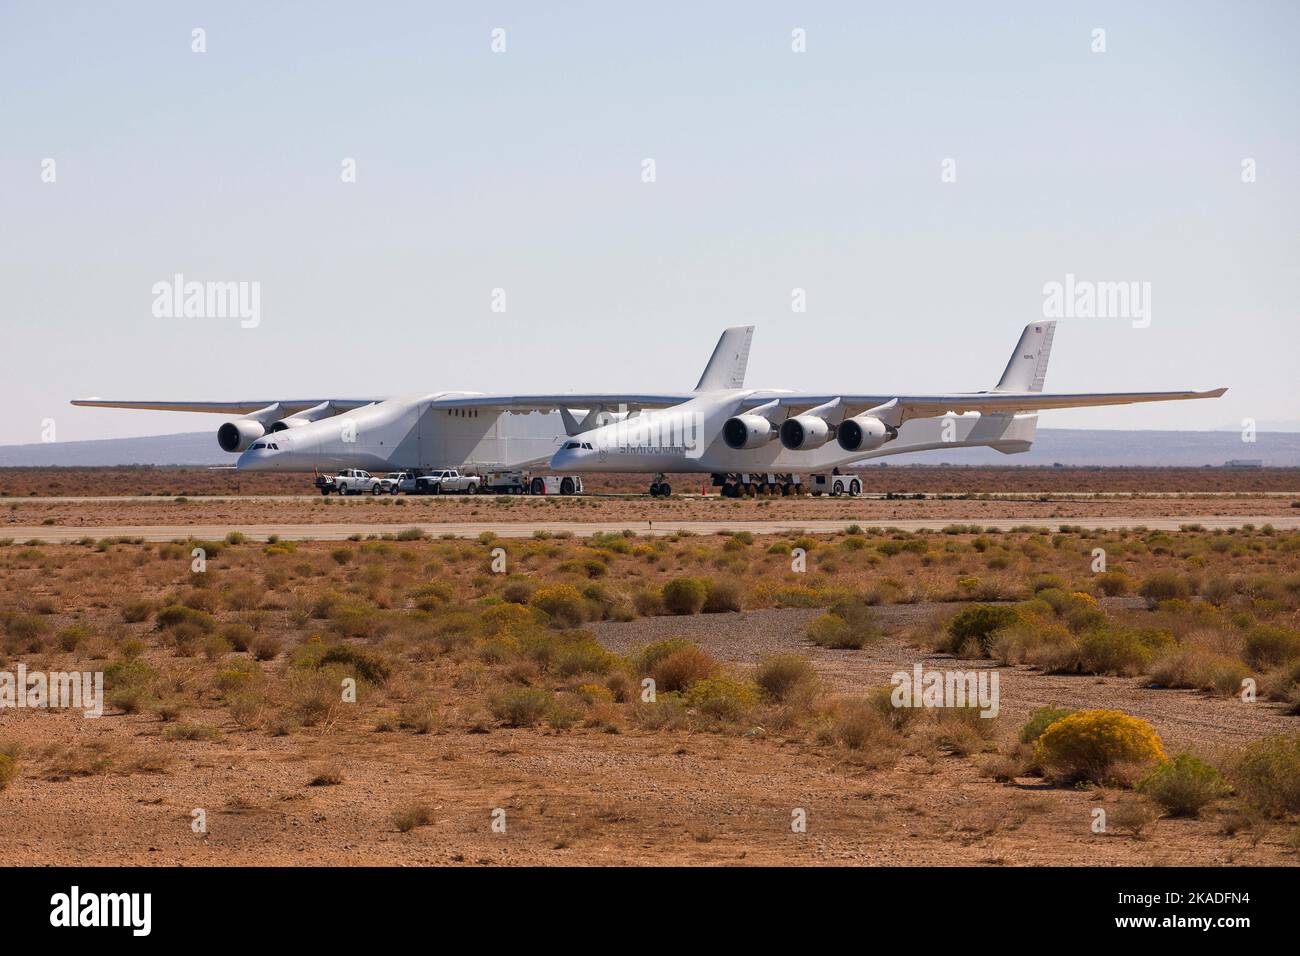 The Scaled Composites Model 351 Stratolaunch or Roc is an aircraft built for Stratolaunch Systems by Scaled Composites to carry air-launch-to-orbit rockets. It was announced in December 2011. The aircraft features a twin-fuselage design and the longest wingspan ever flown. It can carry under the beam connecting the two fuselages a rocket with a maximum mass of 227 tons. Los Angeles, Ca, USA on October 17, 2022. Photo by Thomas Arnoux/ABACAPRESS.COM Stock Photo